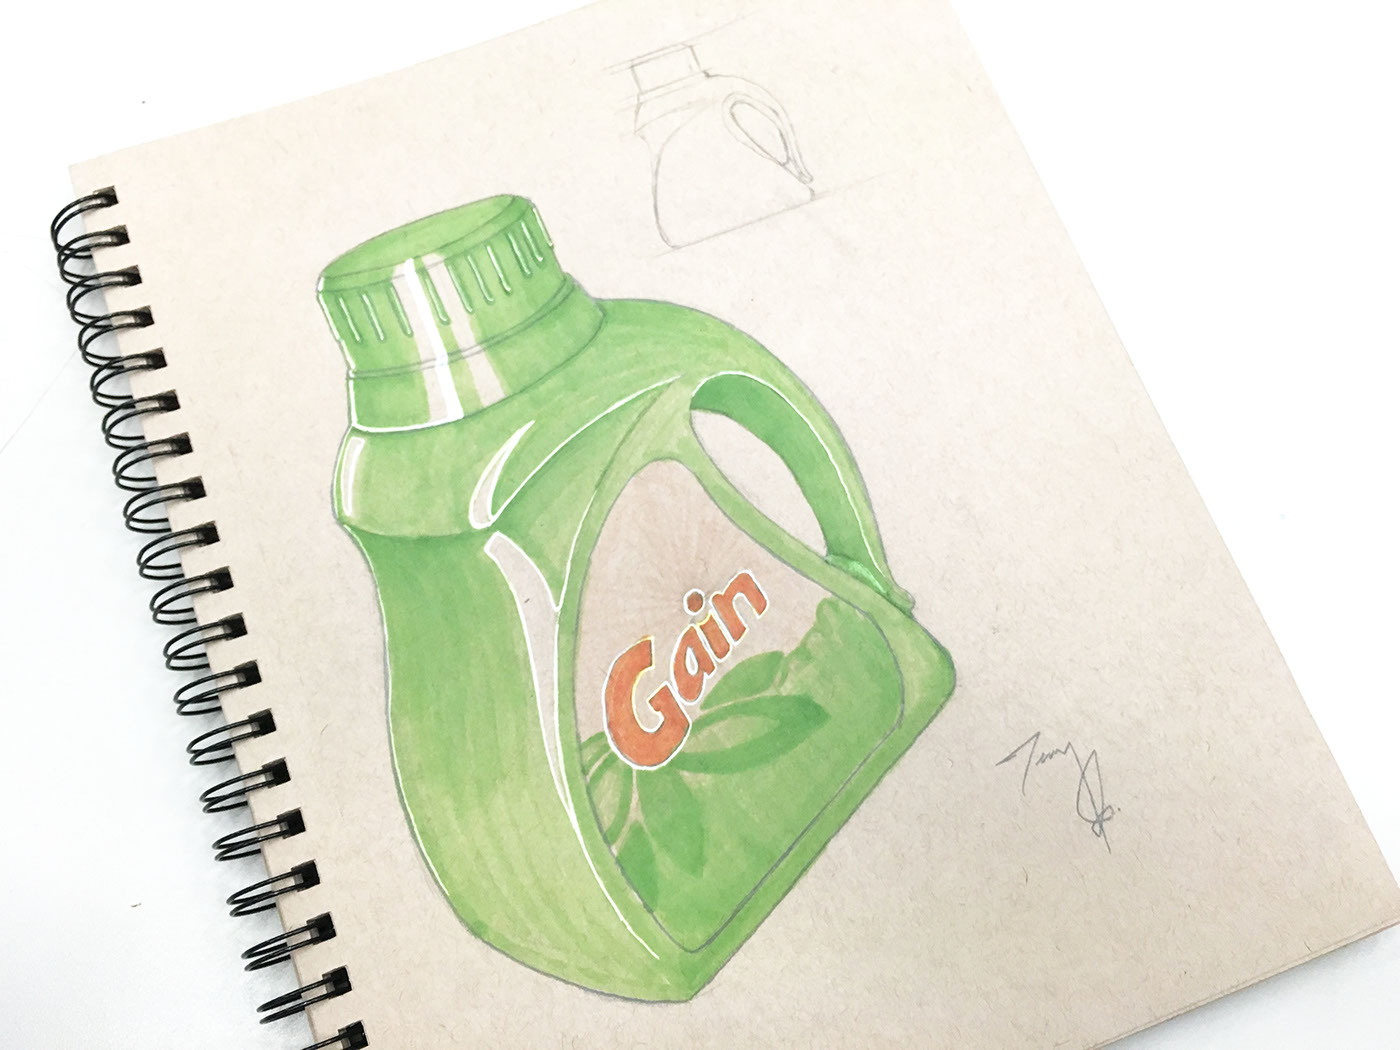 product deisgn sketching rendering